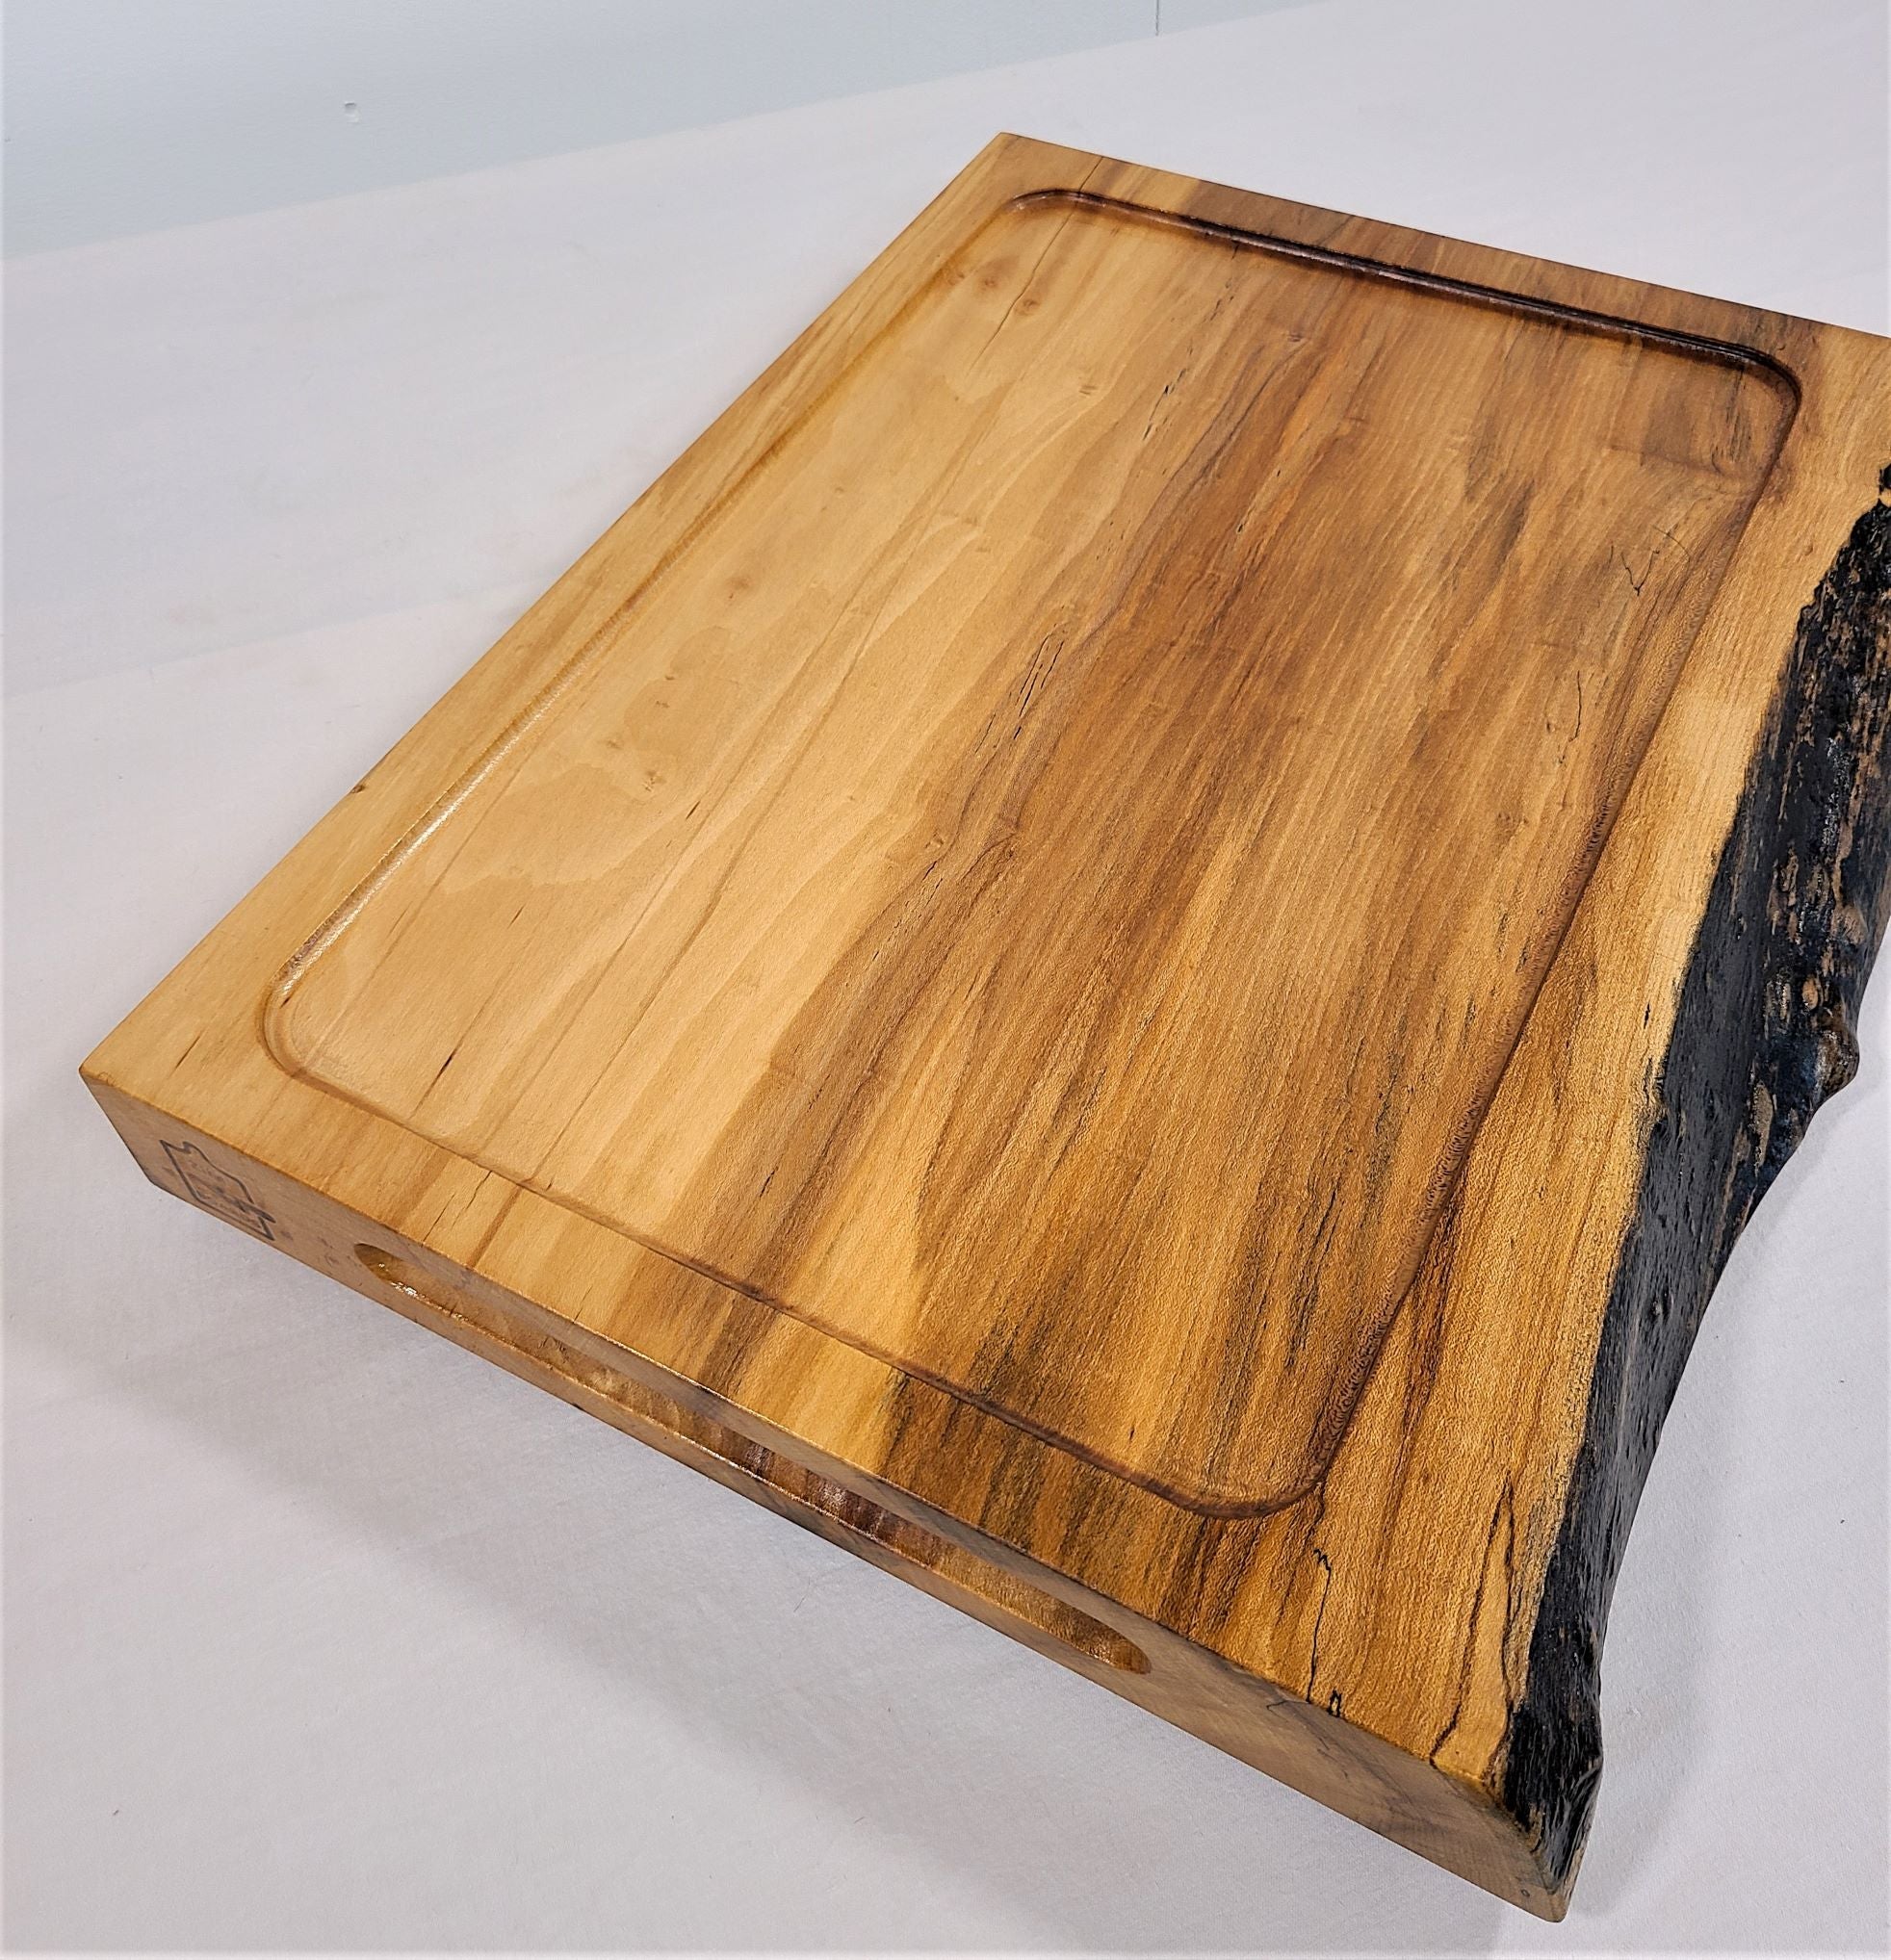 Large Maple wood carving board made of solid wood.  Features a live edge and reverses to solid surface.  Made in USA by Zimboards